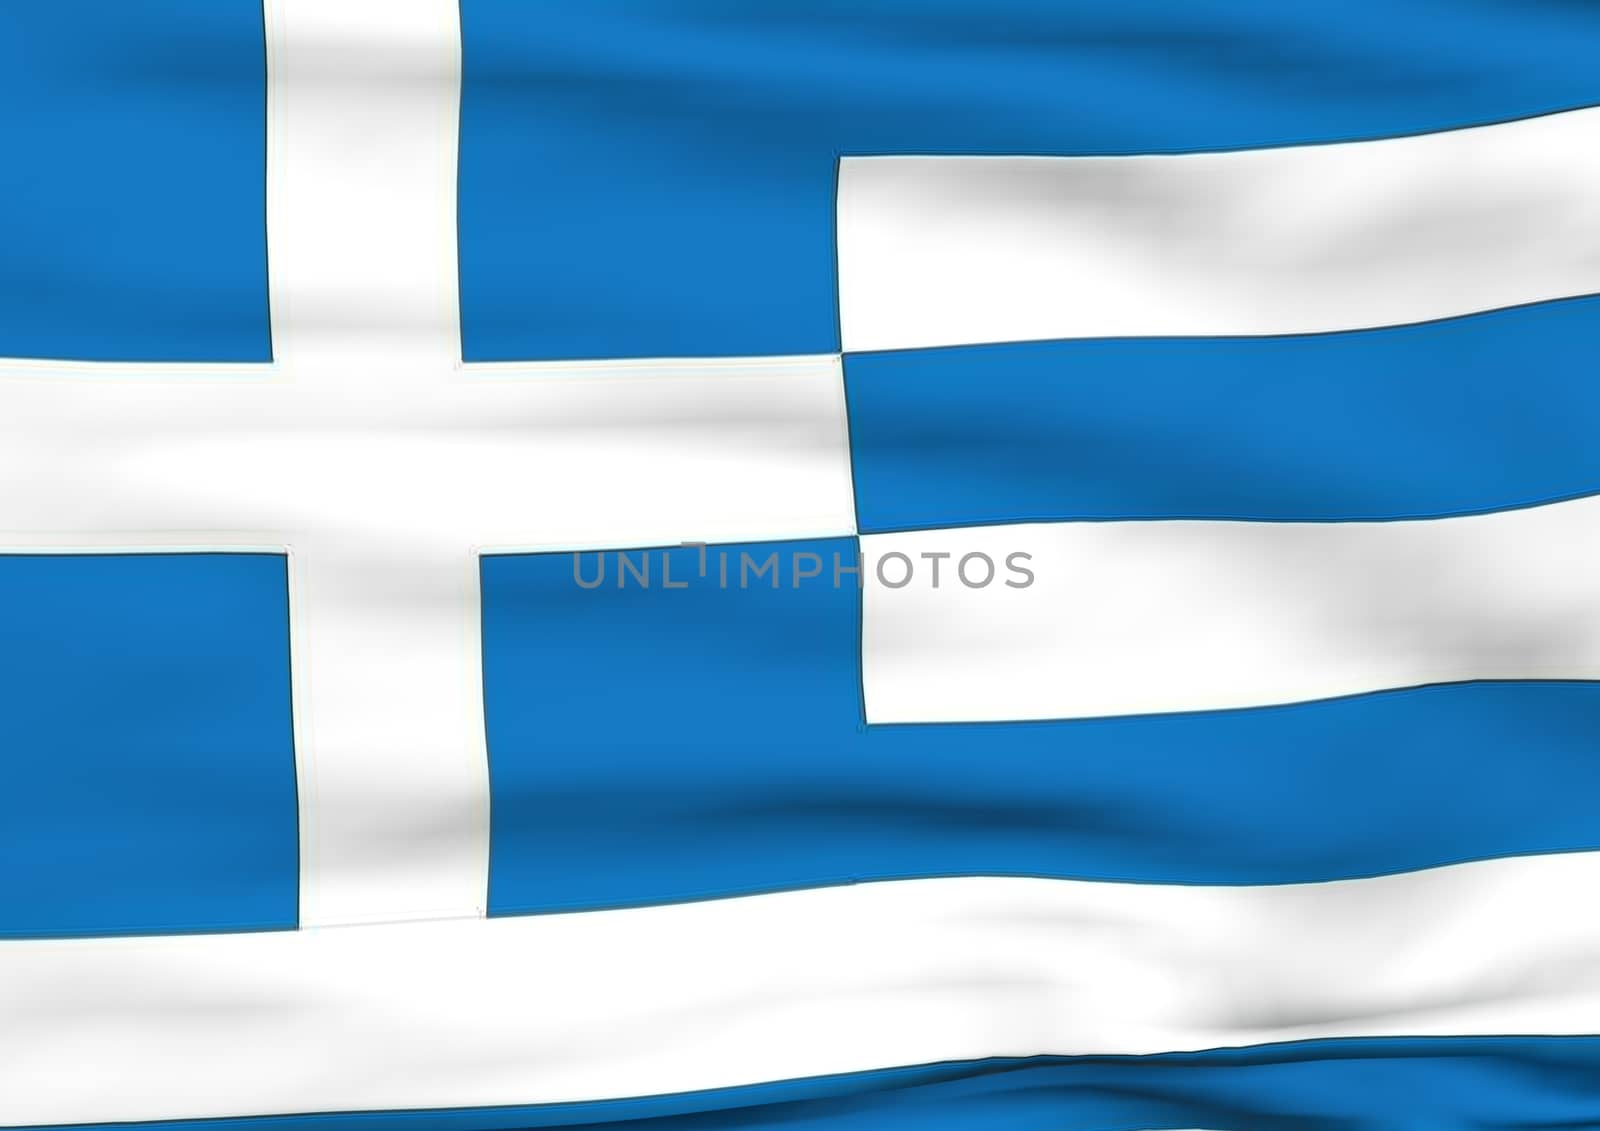 Image of a waving flag of Greece